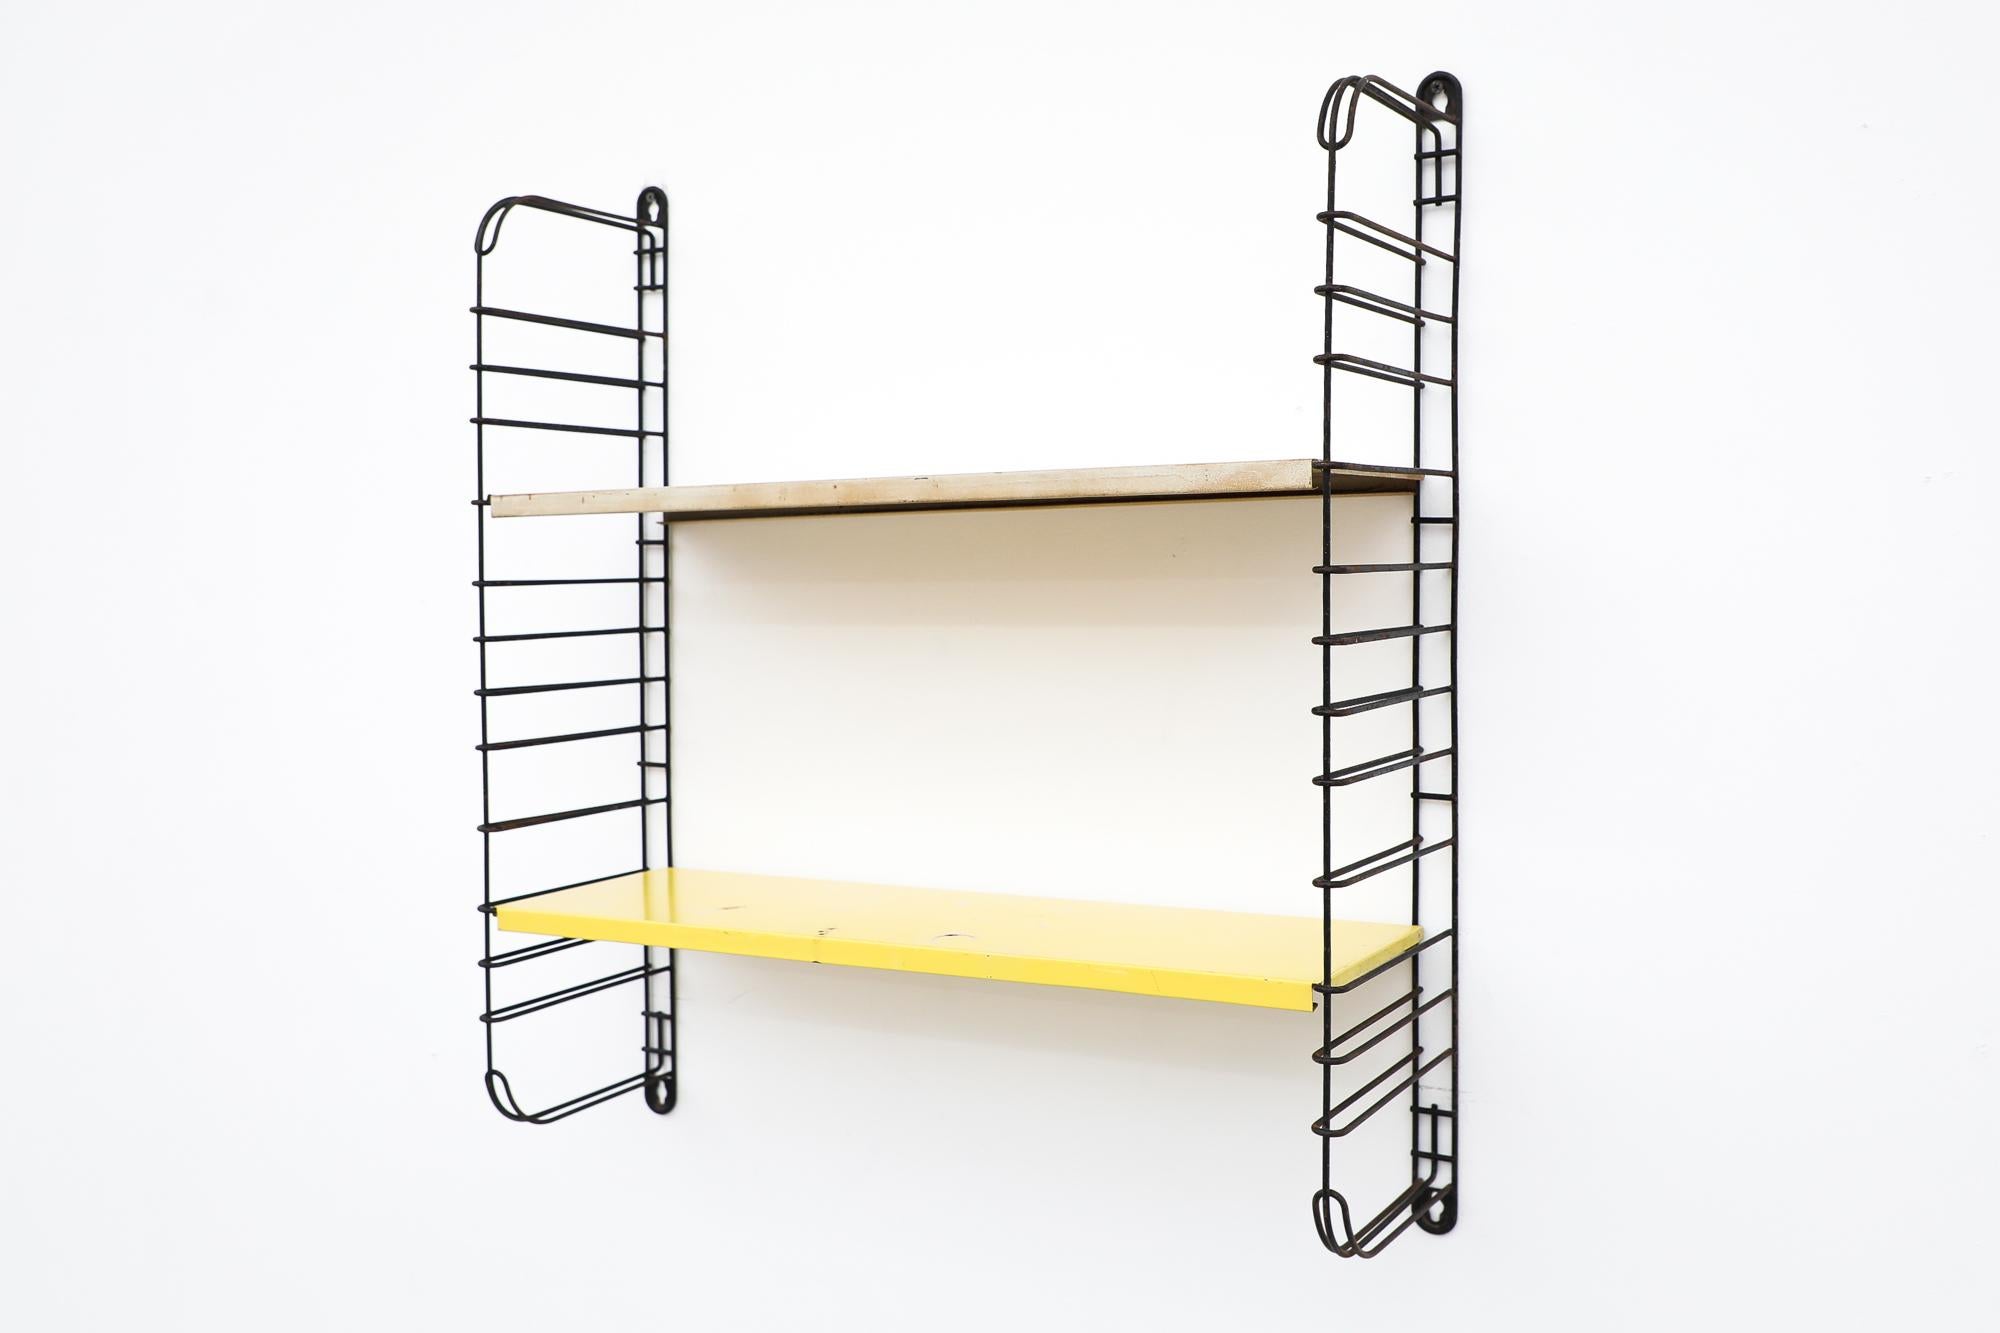 Dutch Midcentury Tomado White and Yellow Industrial Shelving Unit